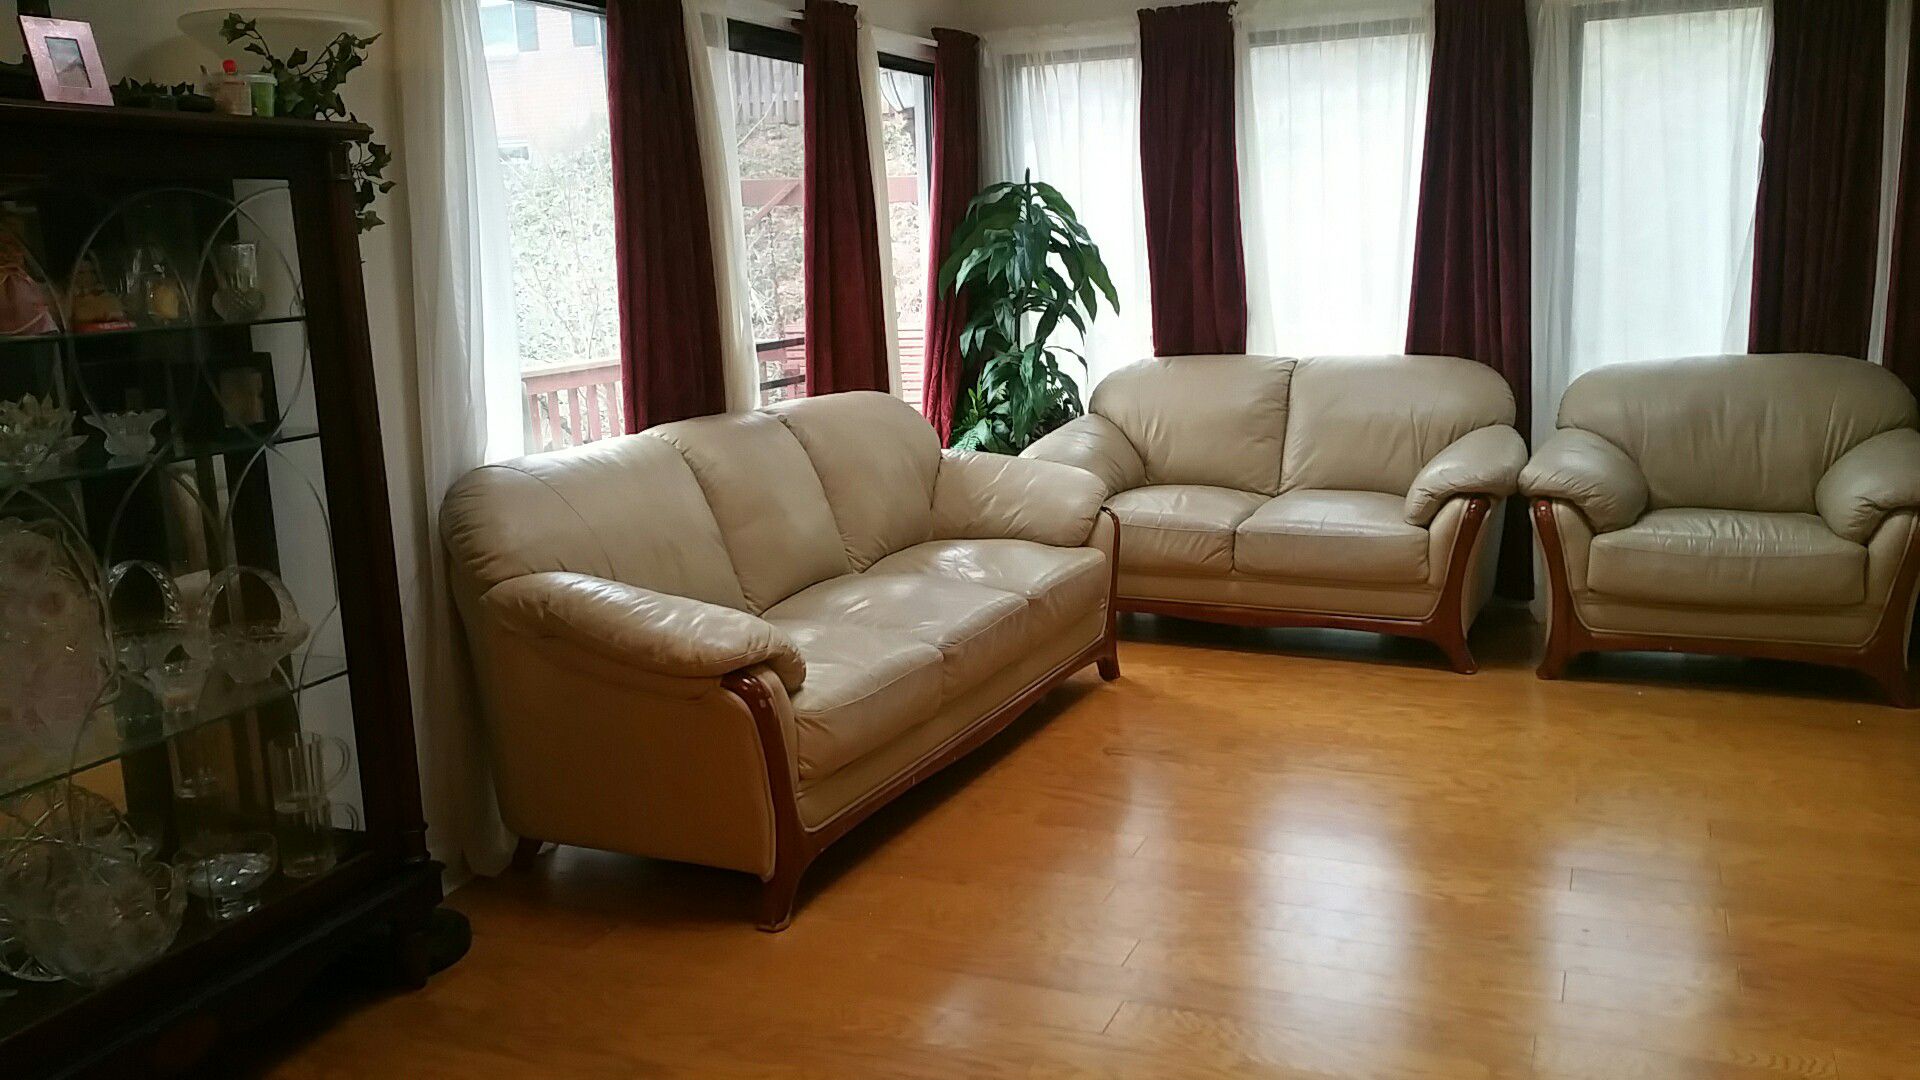 Sofa and dining table set